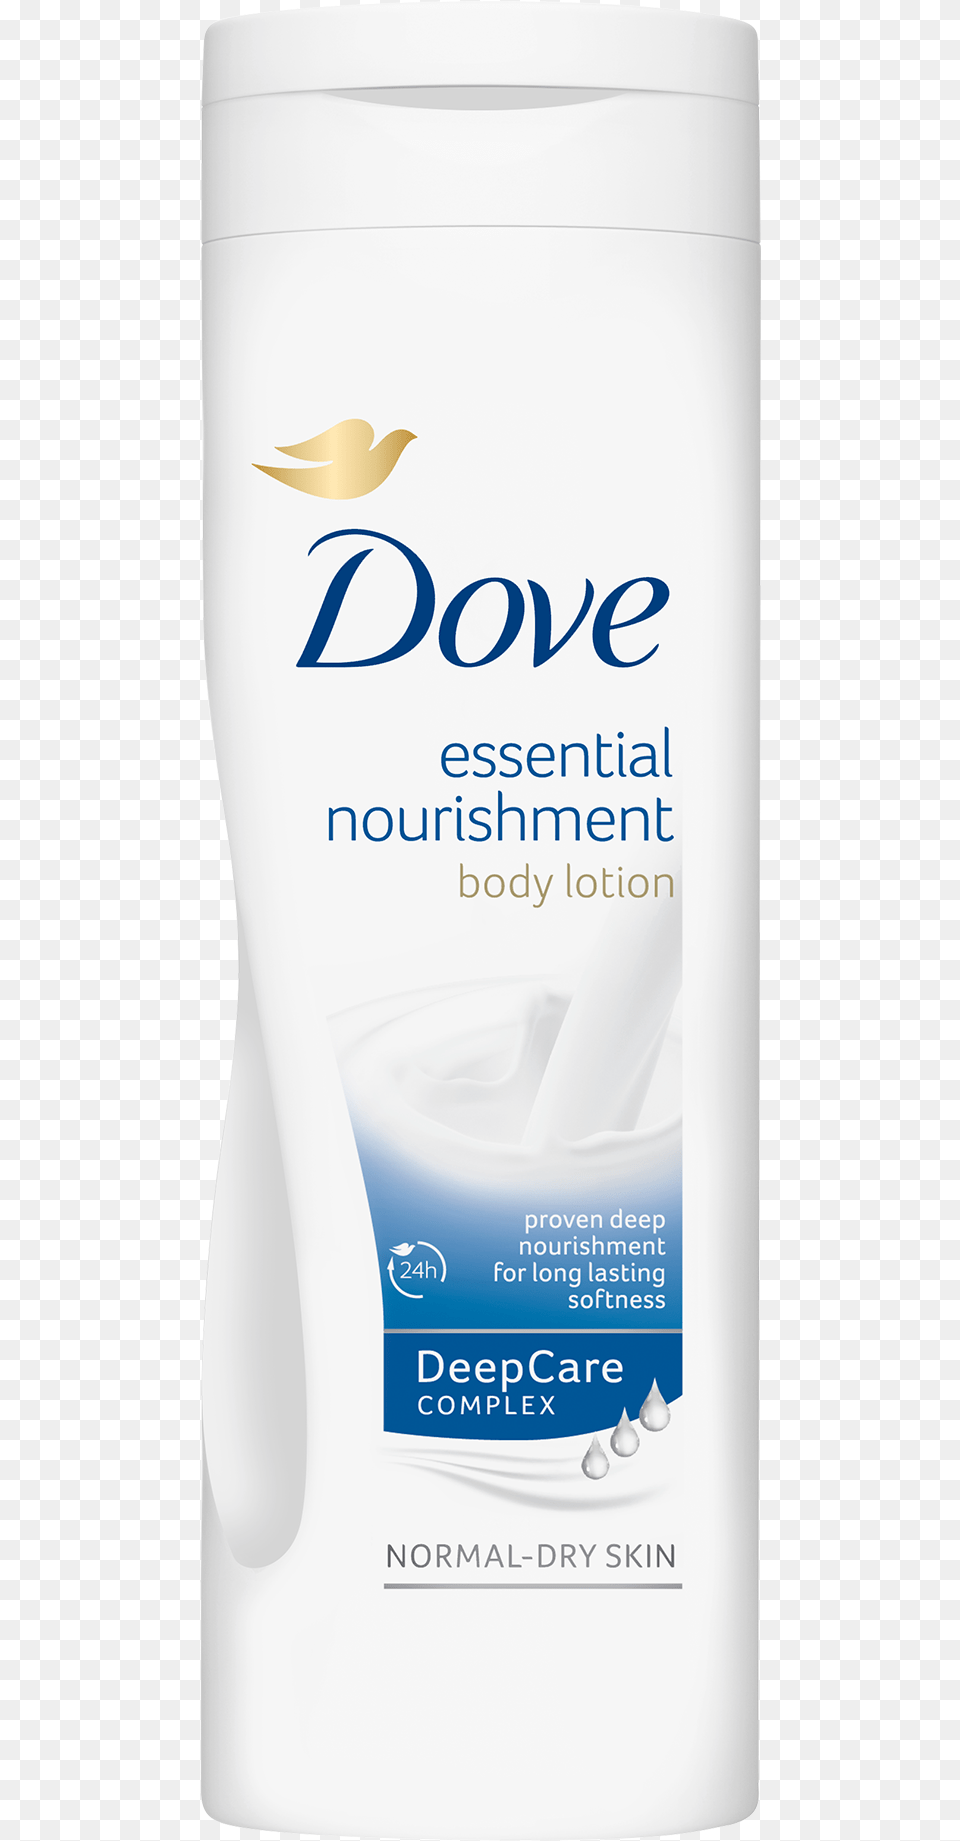 Dove Essential Nourishment Body Lotion 400ml Dove Body Lotion For Dry Skin, Cosmetics, Deodorant, Can, Tin Png Image